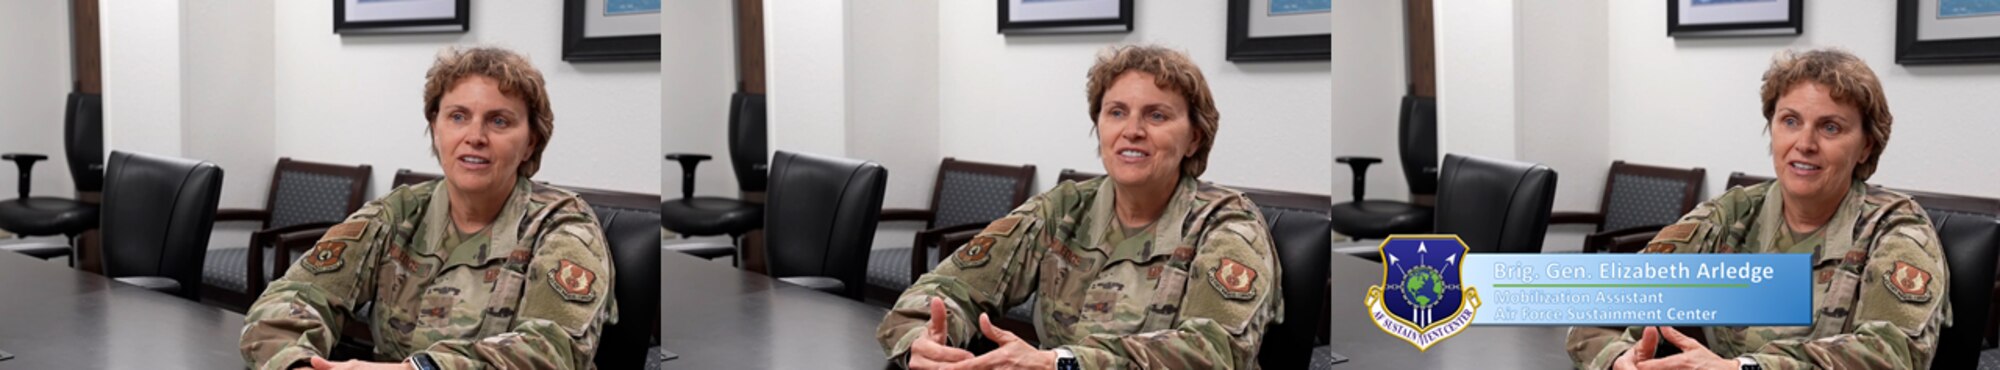 Brig Gen Elizabeth Arledge, mobilization assistant to the AFSC Commander, shares her experiences on both sides of mentorship and what motivates her to be a guide for others, to help them reach their goals.